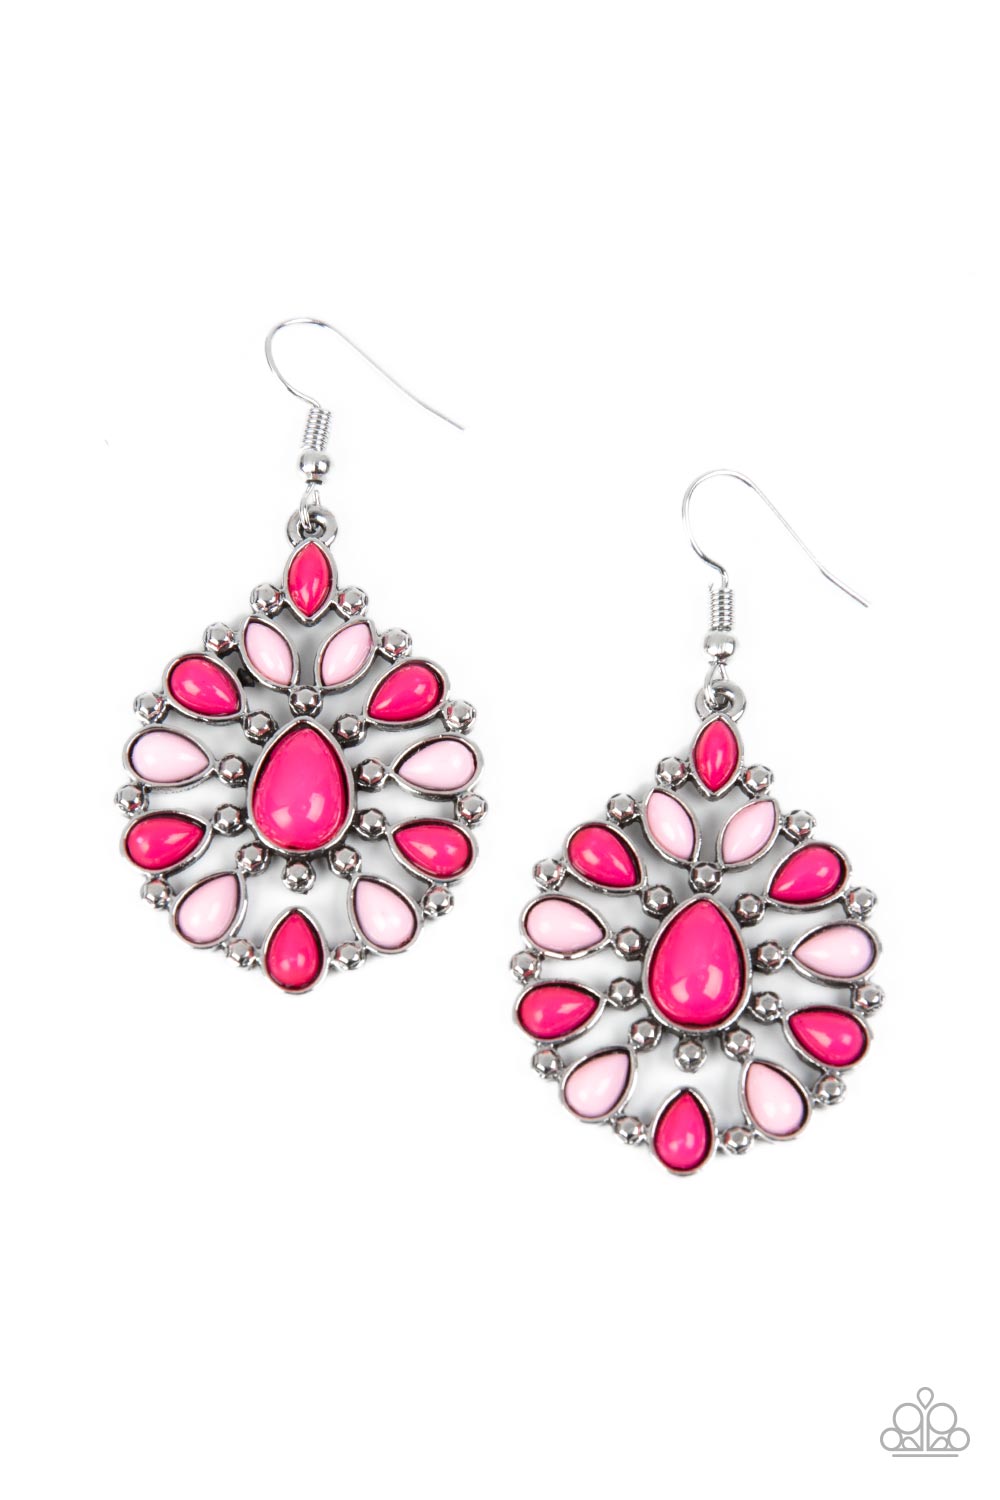 Lively Luncheon Pink Earring - Paparazzi Accessories  Bubbly pink and Pale Rosette beads fan out from a studded pink teardrop center, resulting in a colorful frame. Earring attaches to a standard fishhook fitting.  Sold as one pair of earrings.